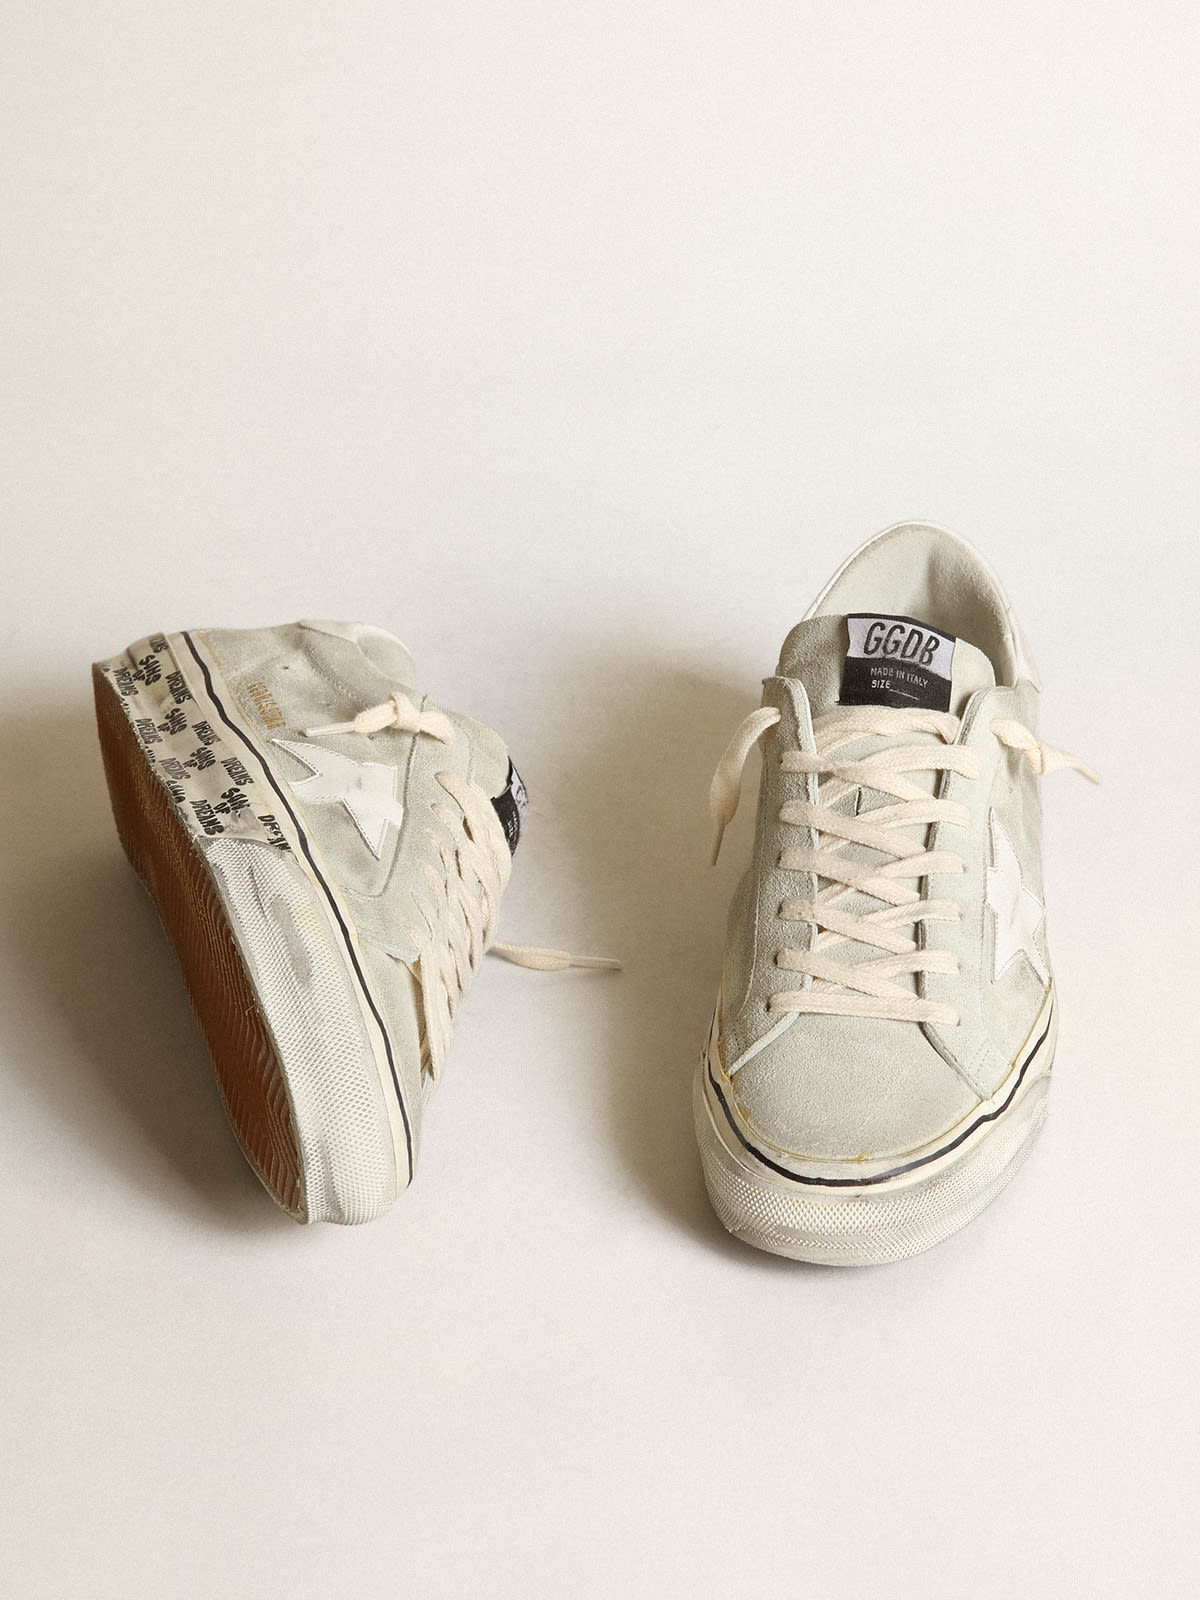 Golden Goose - Super-Star sneakers in ice-gray suede with white leather star and heel tab in 